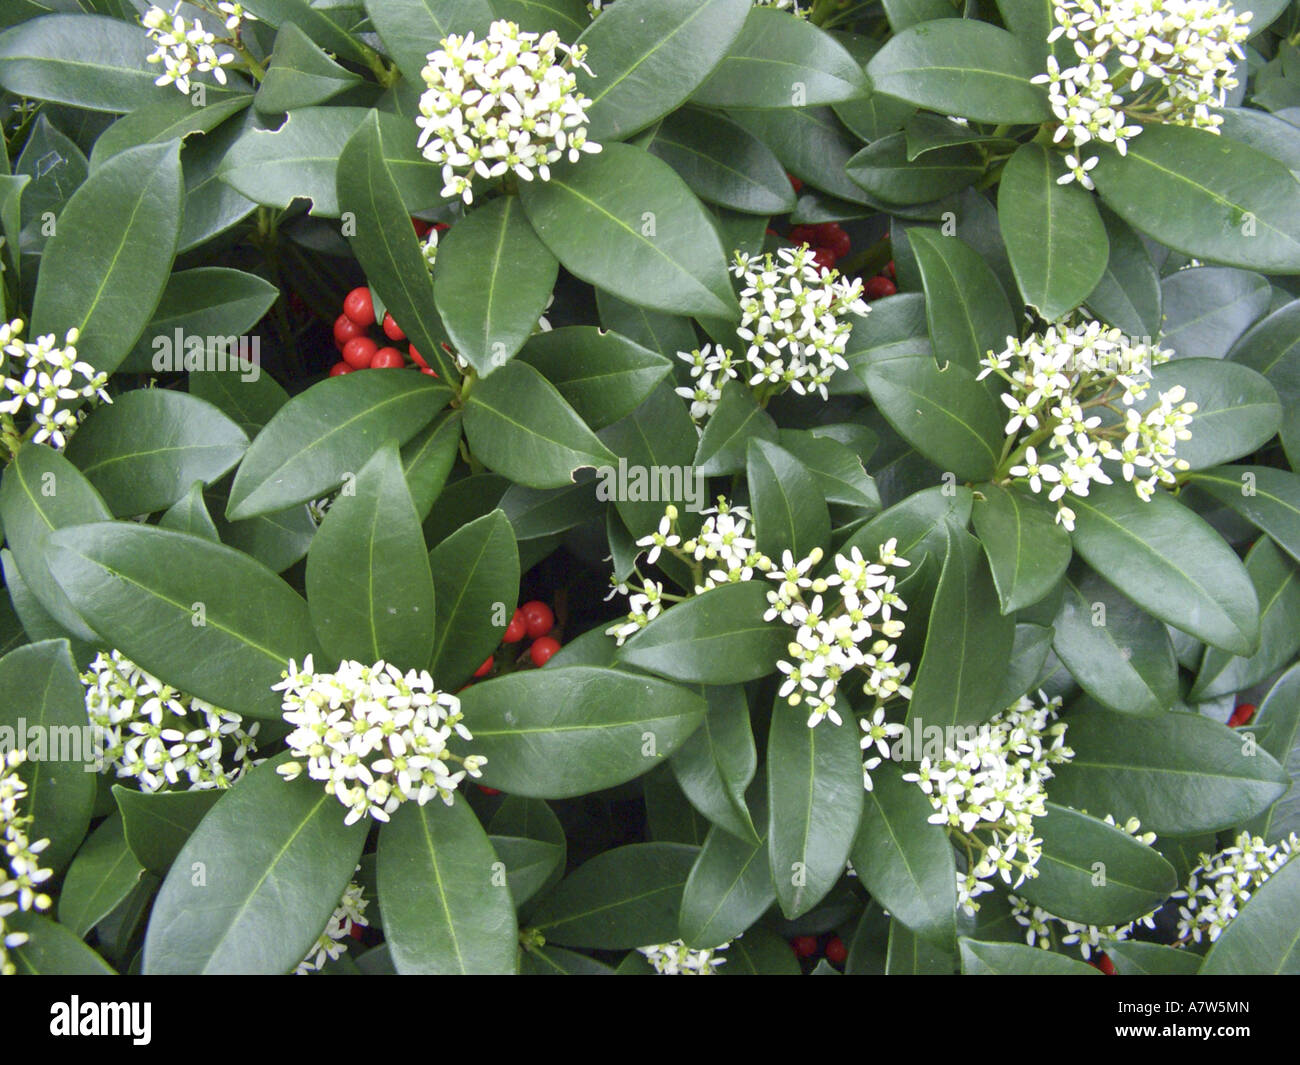 Japanese Skimmia (Skimmia japonica), with flowers and fruits Stock Photo